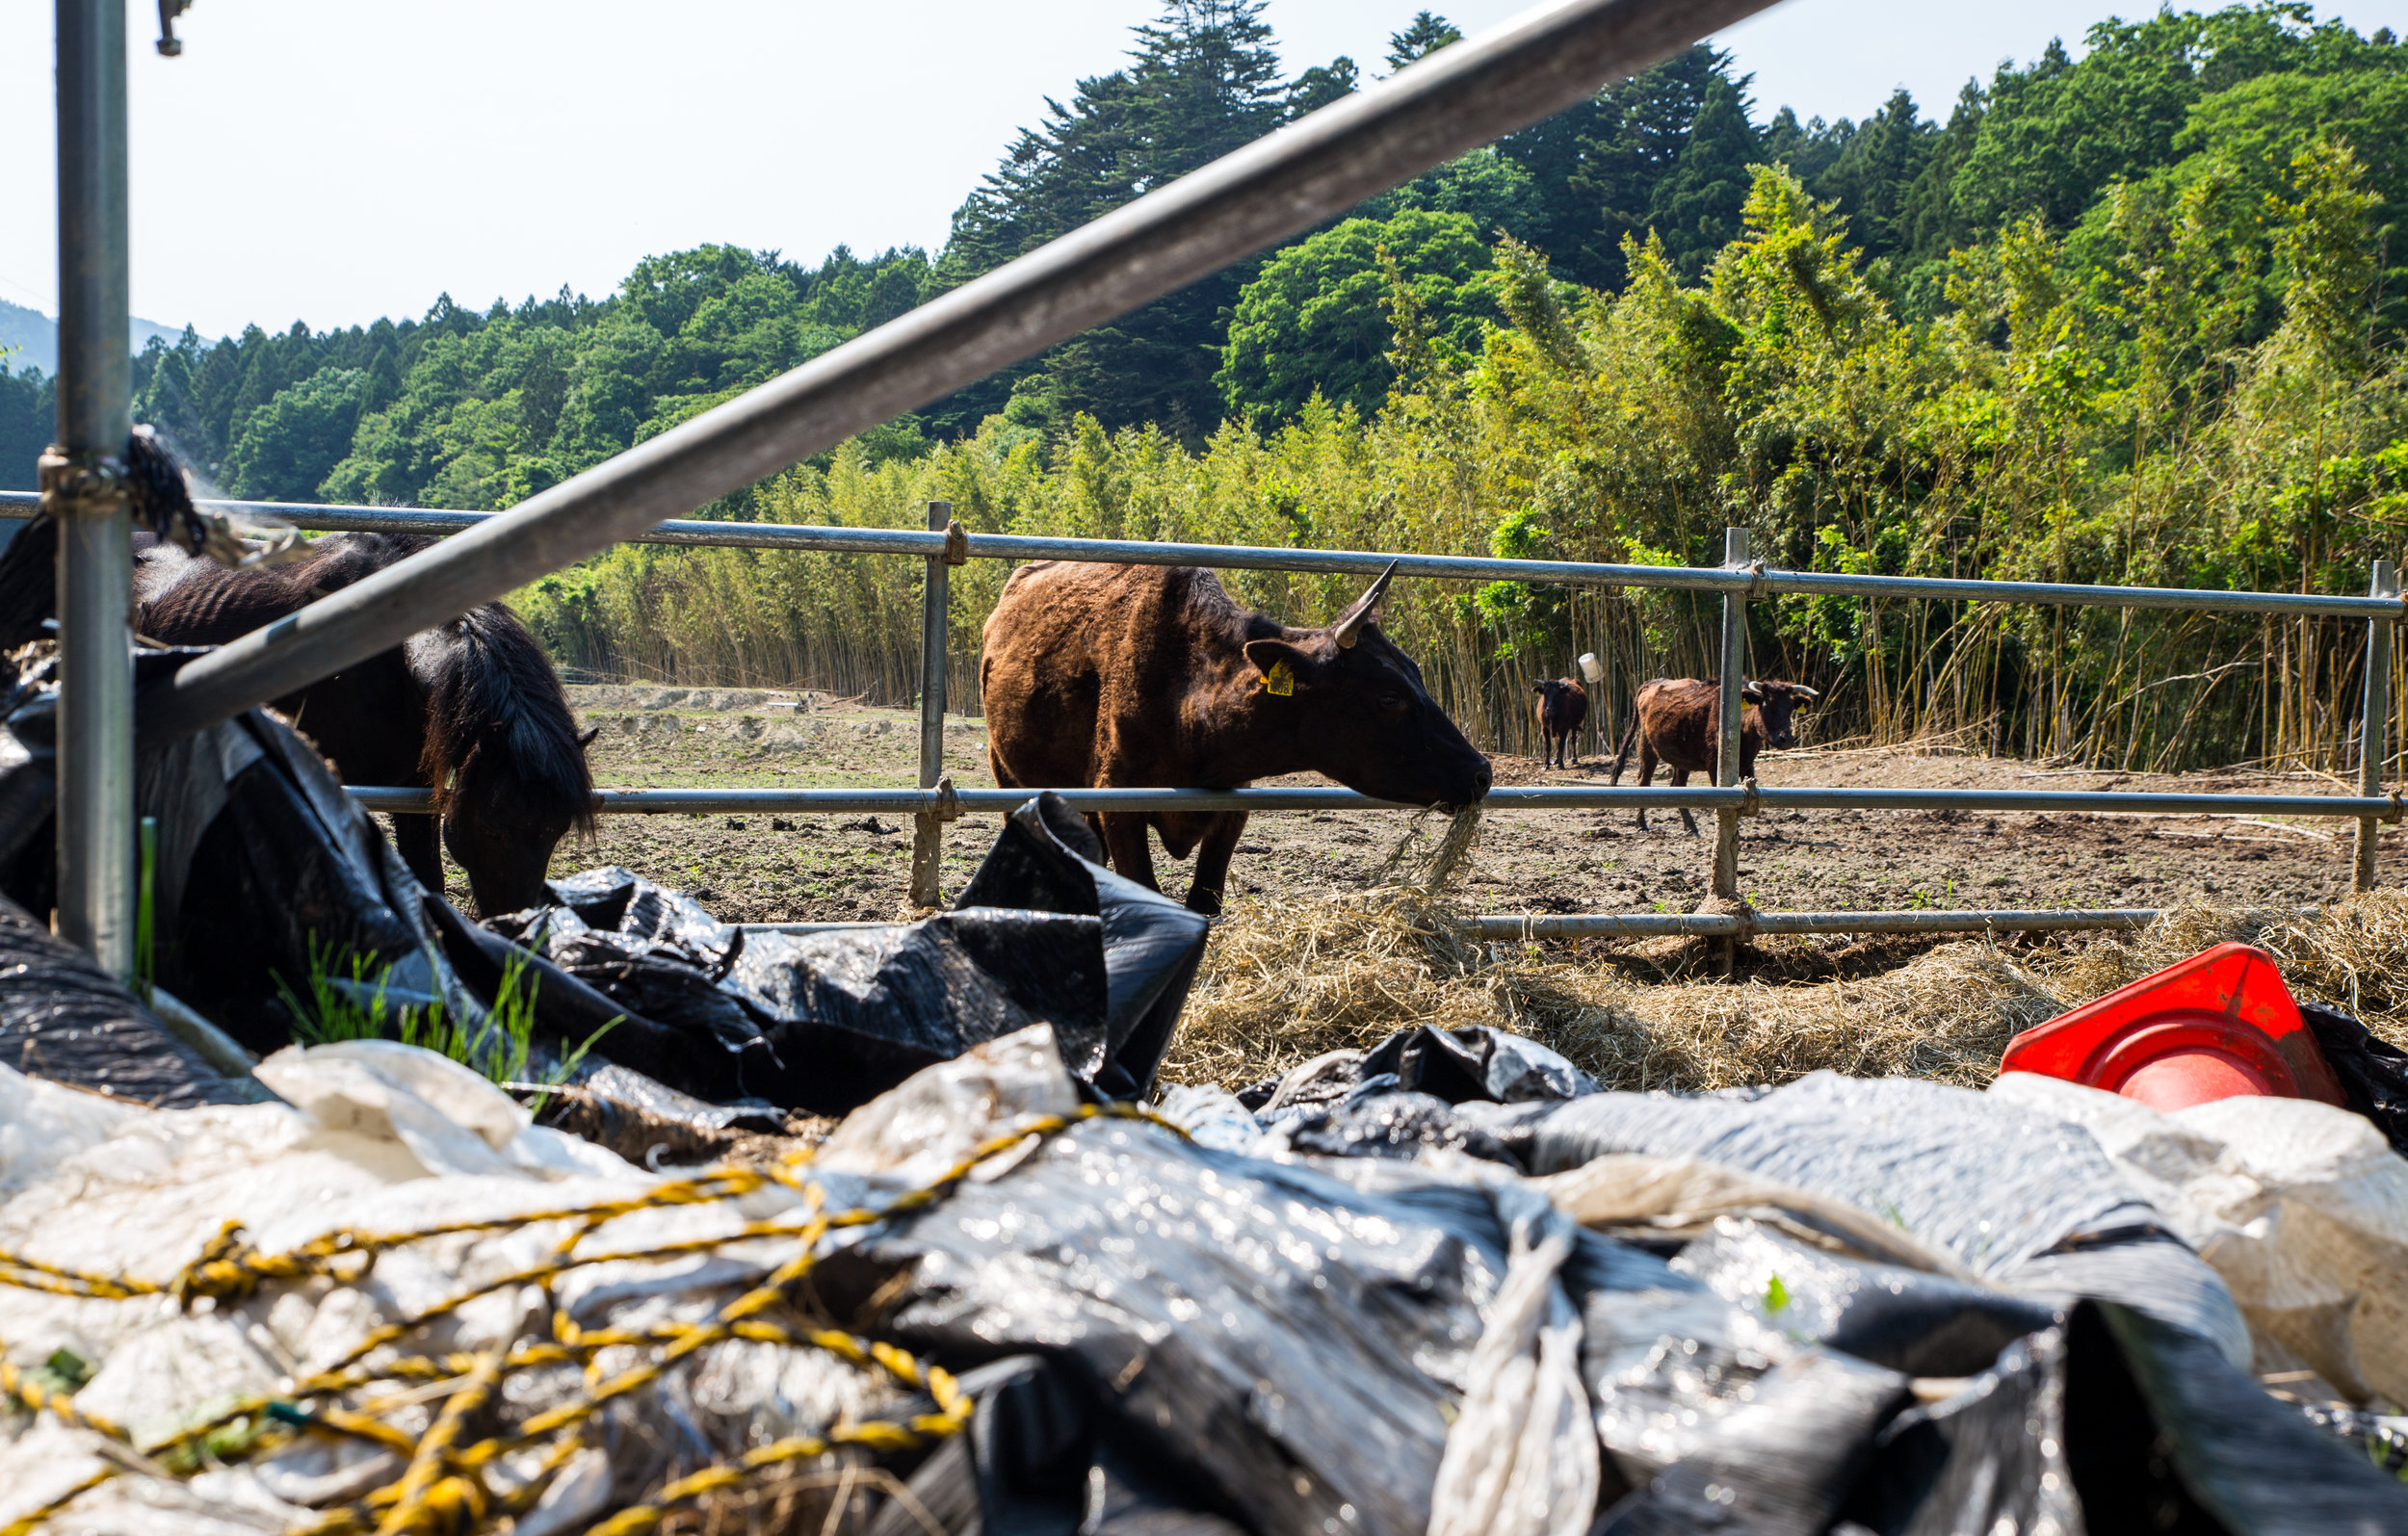  When he first began taking care of the animals, Matsumura struggled to get feed that wasn't contaminated. Next to the pasture lay bags of garbage from feed.&nbsp; 